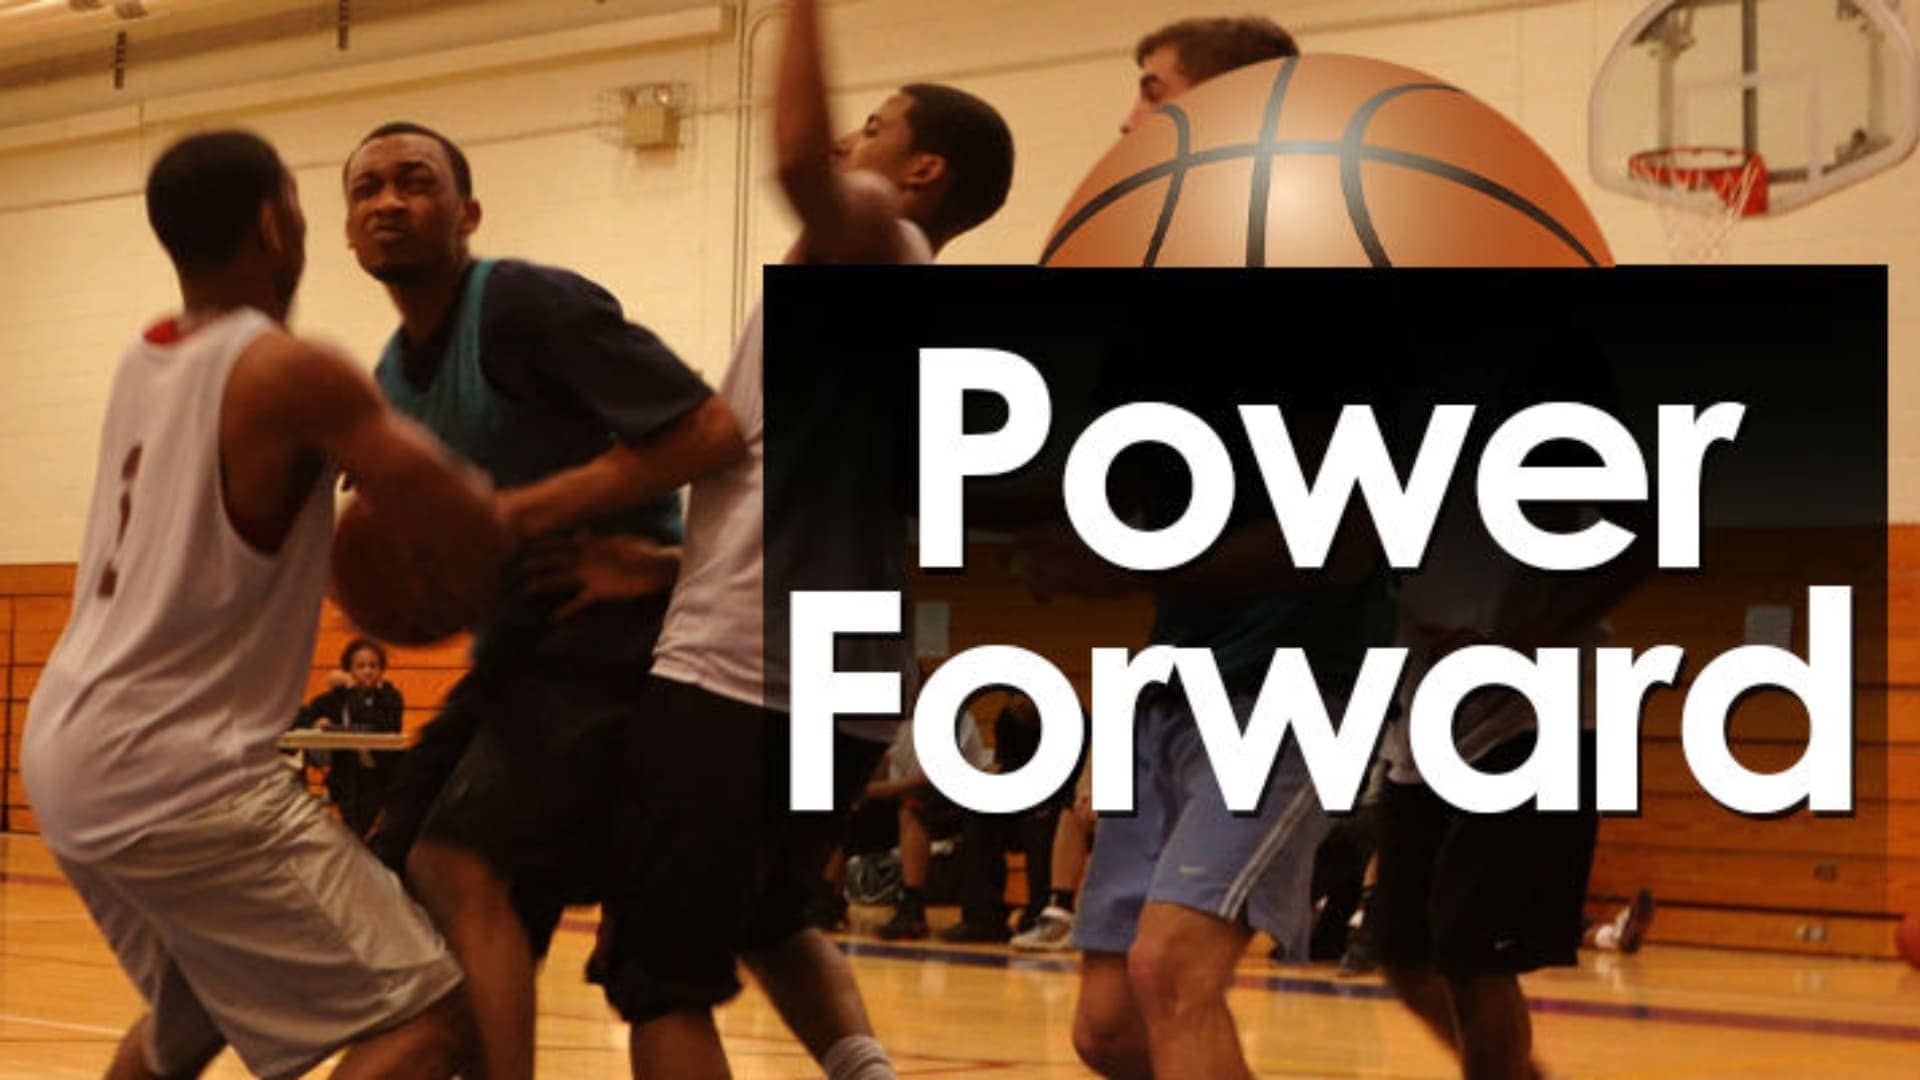 Power forward- what are basketball positions